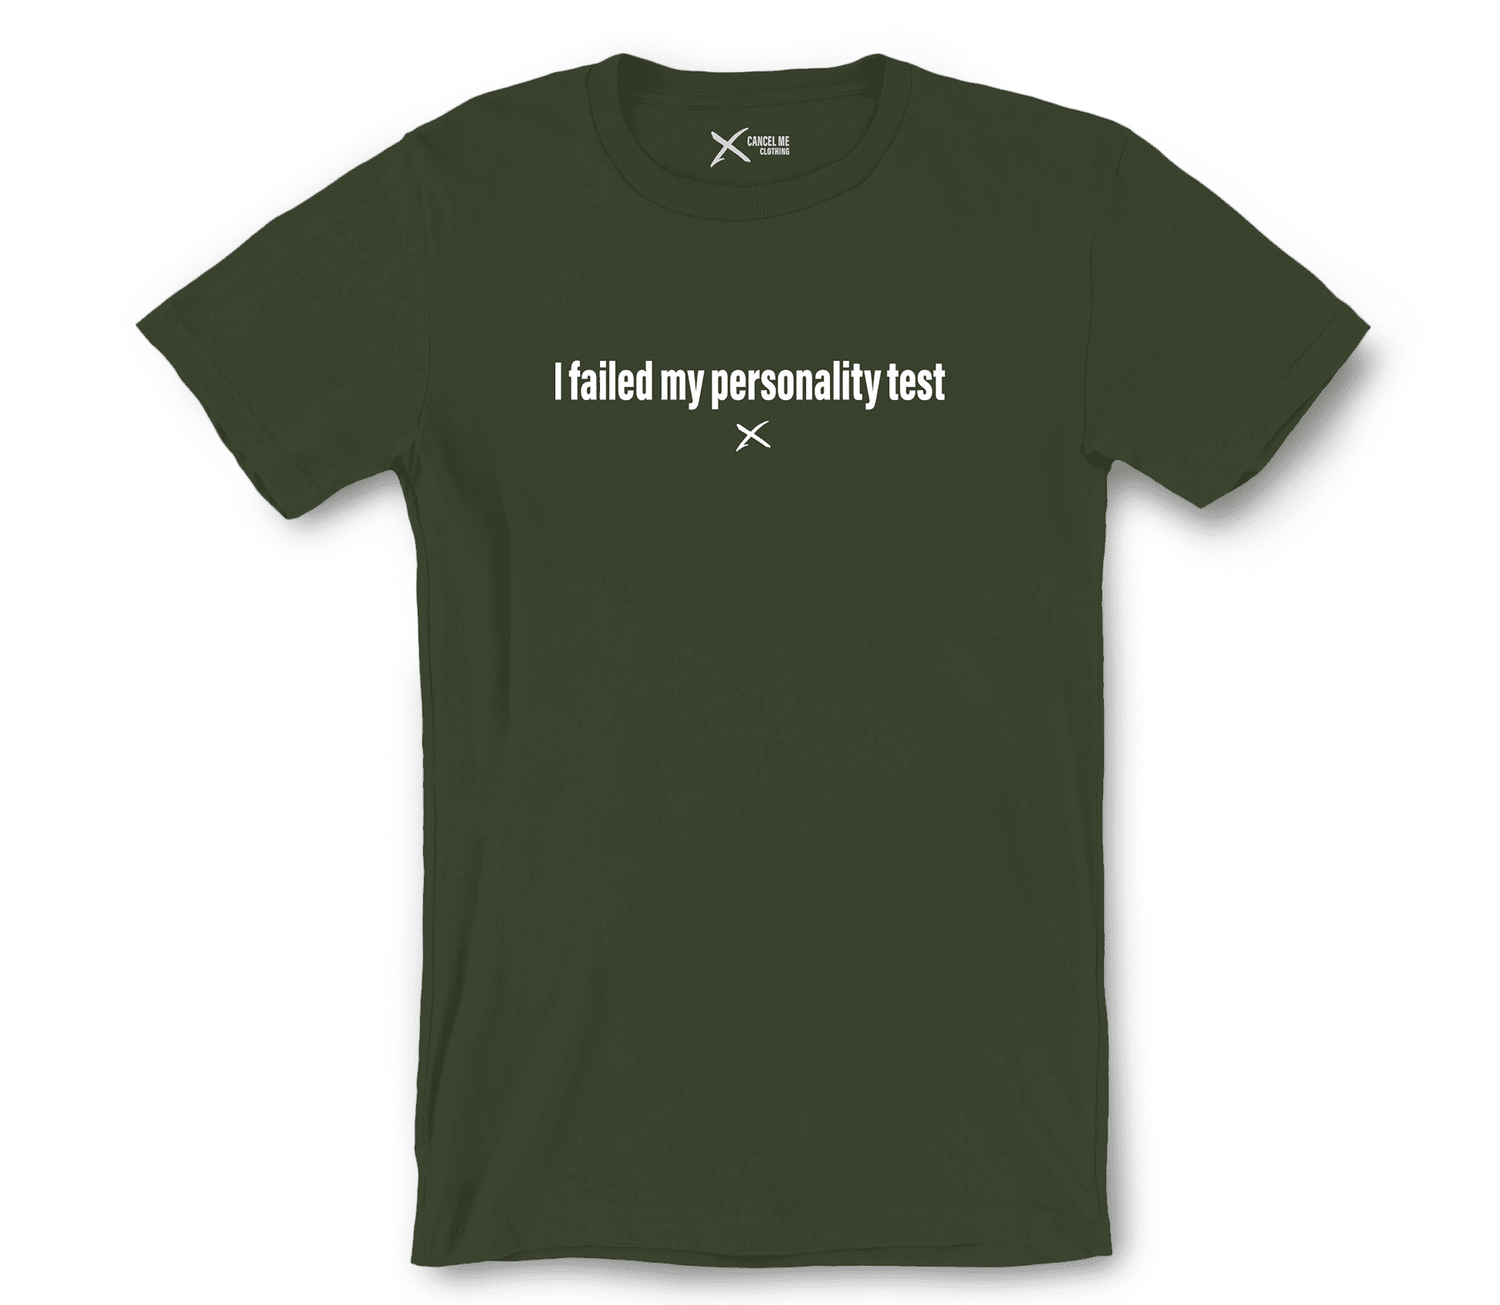 lp-personality_3-shirt_7791521497258_i-failed-my-personality-test-shirt_Military Green.png